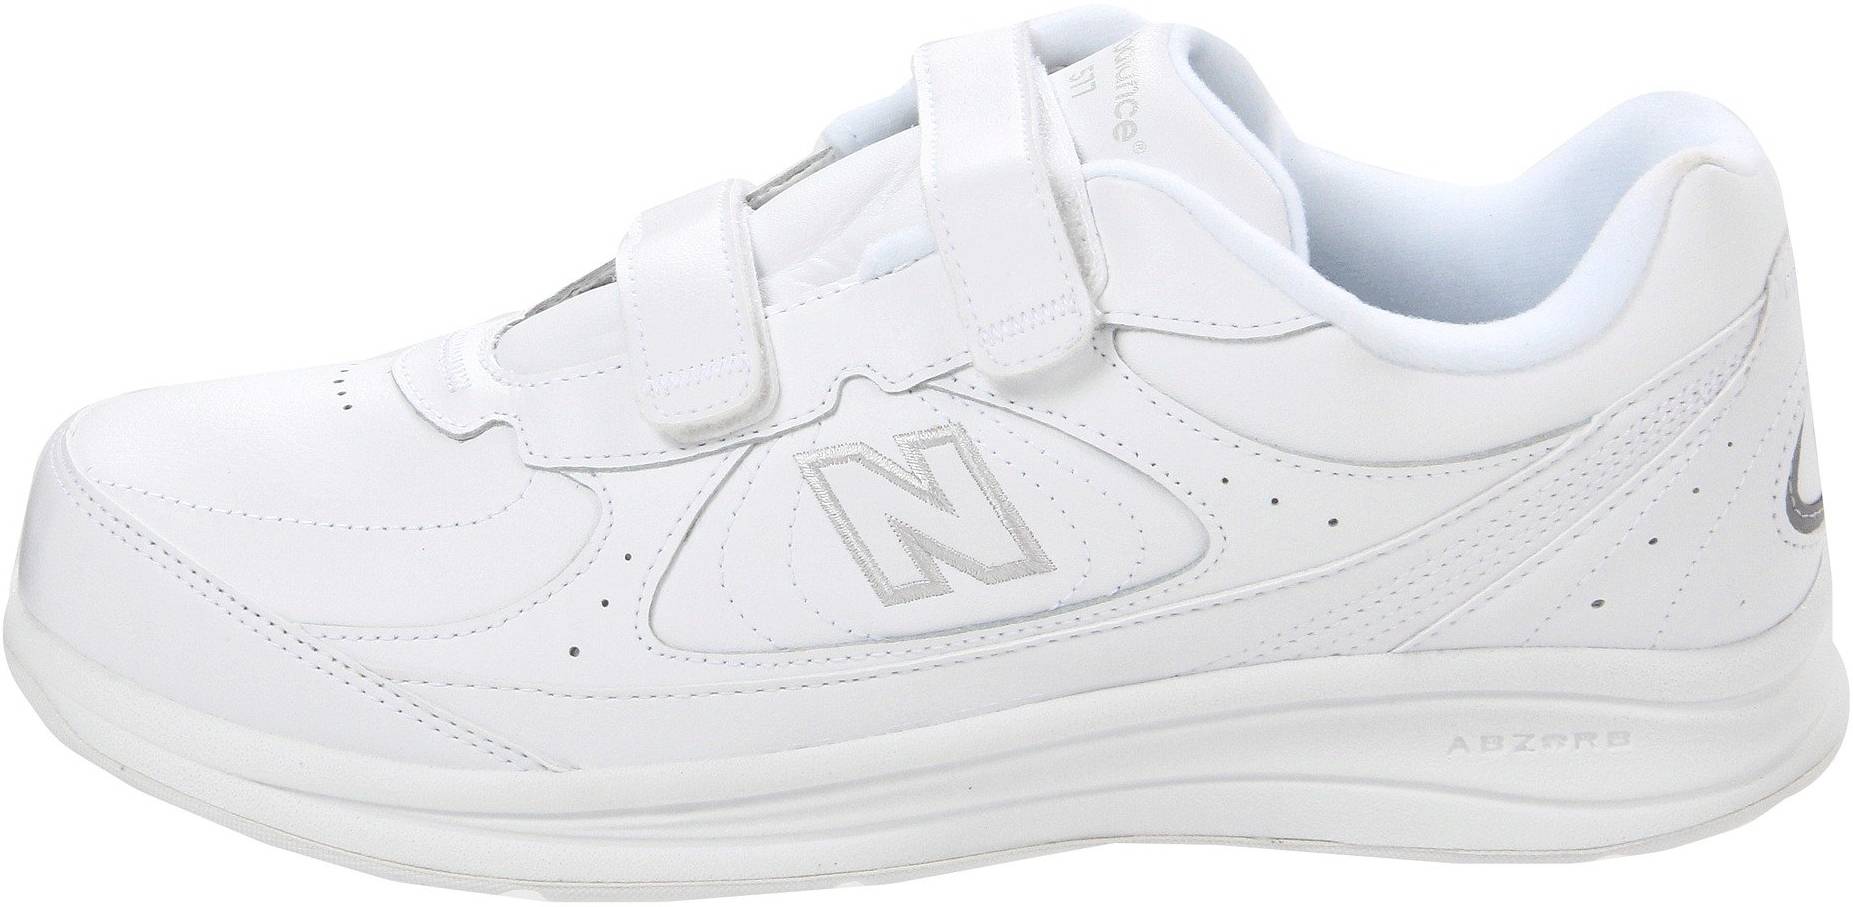 mens new balance walking shoes with velcro straps